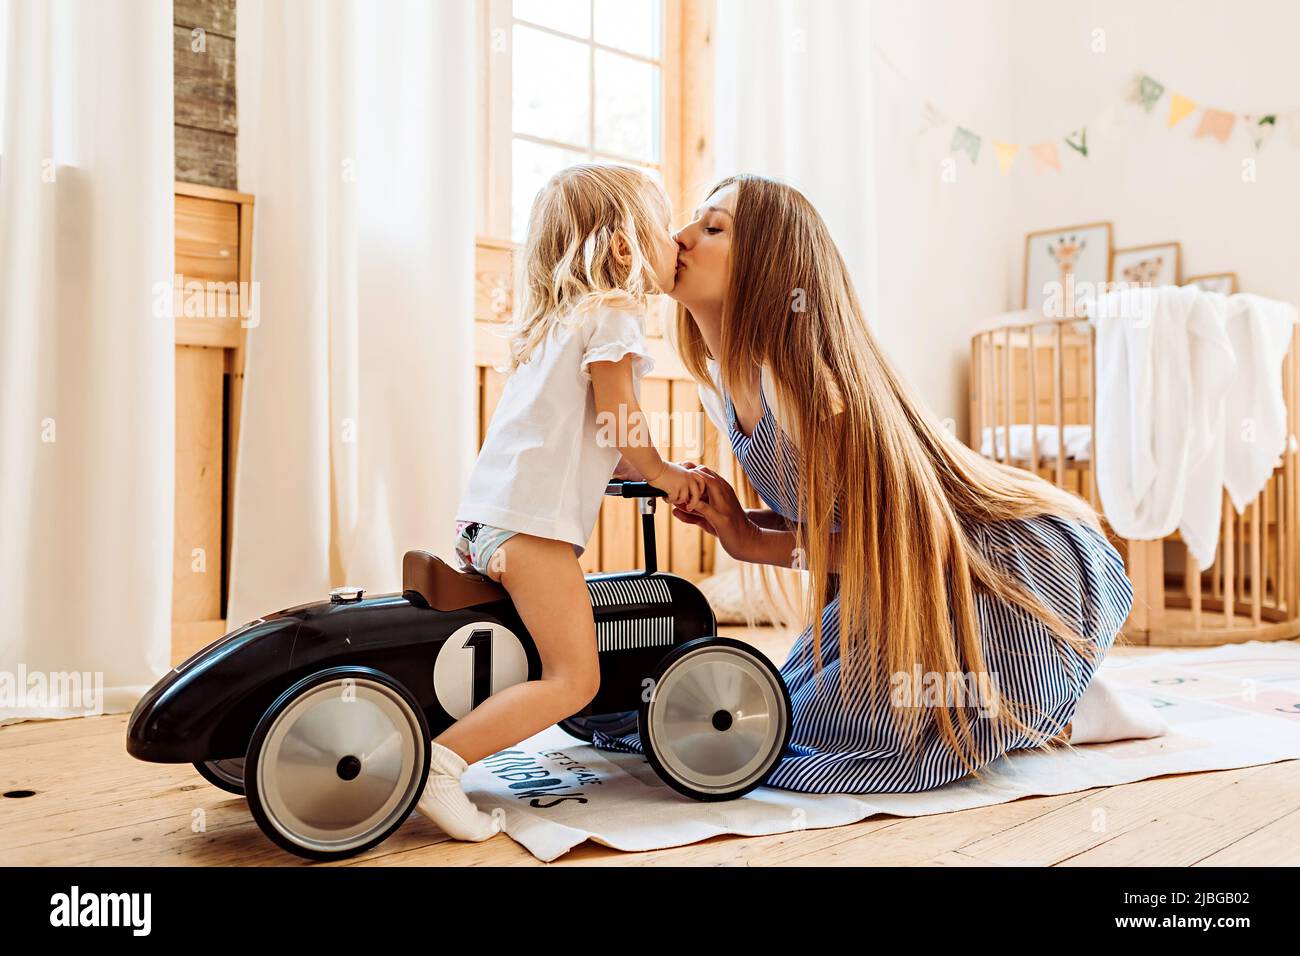 A young mother kisses her little daughter while playing at home. Family leisure lifestyle image Stock Photo